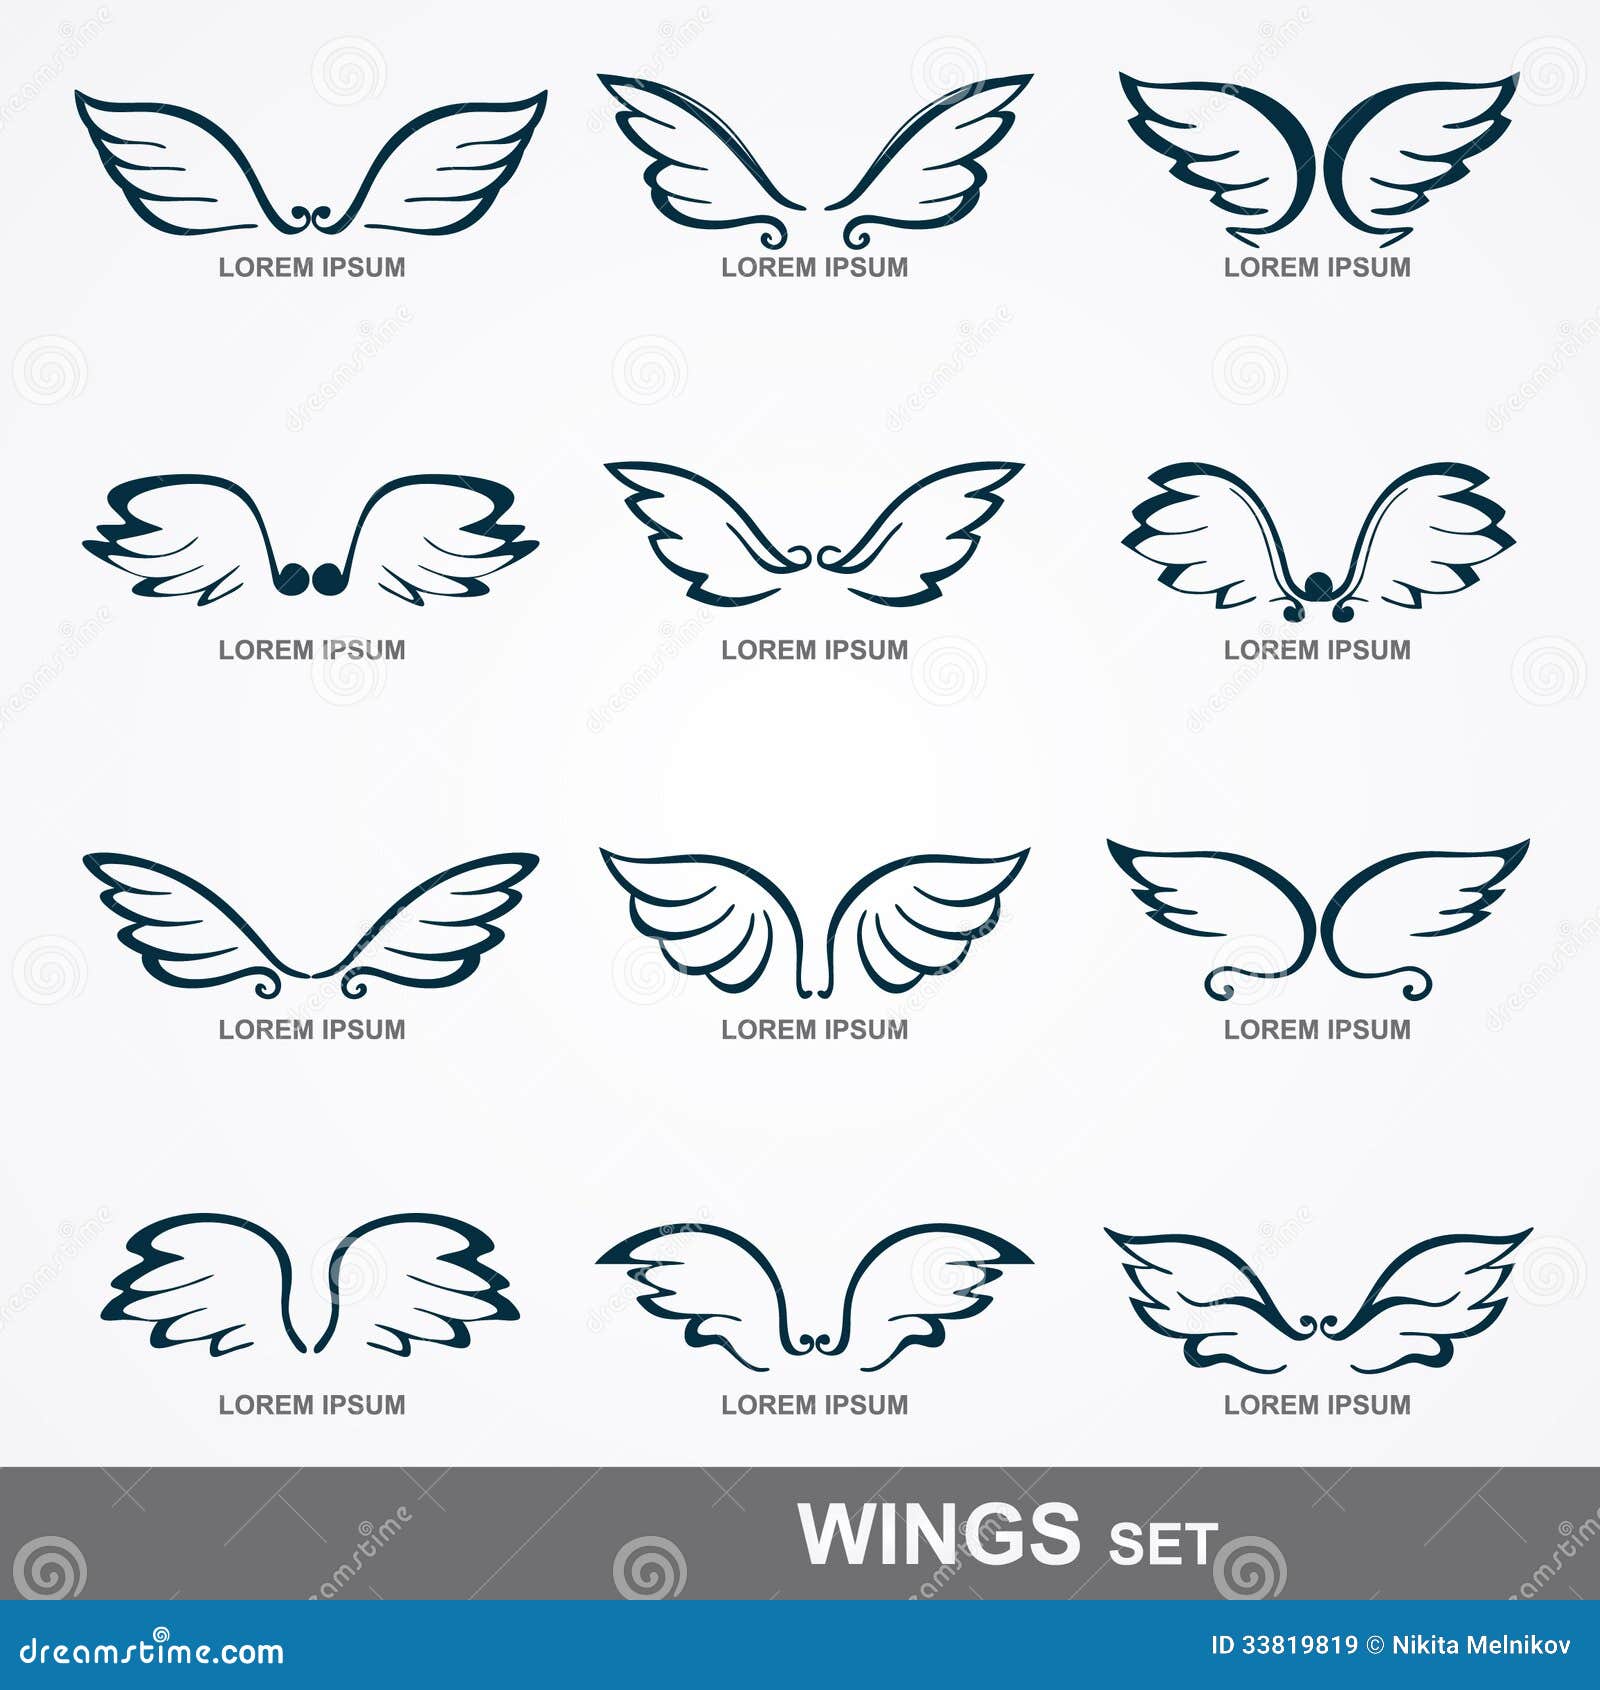 Details more than 76 angel wings matching tattoos super hot  thtantai2